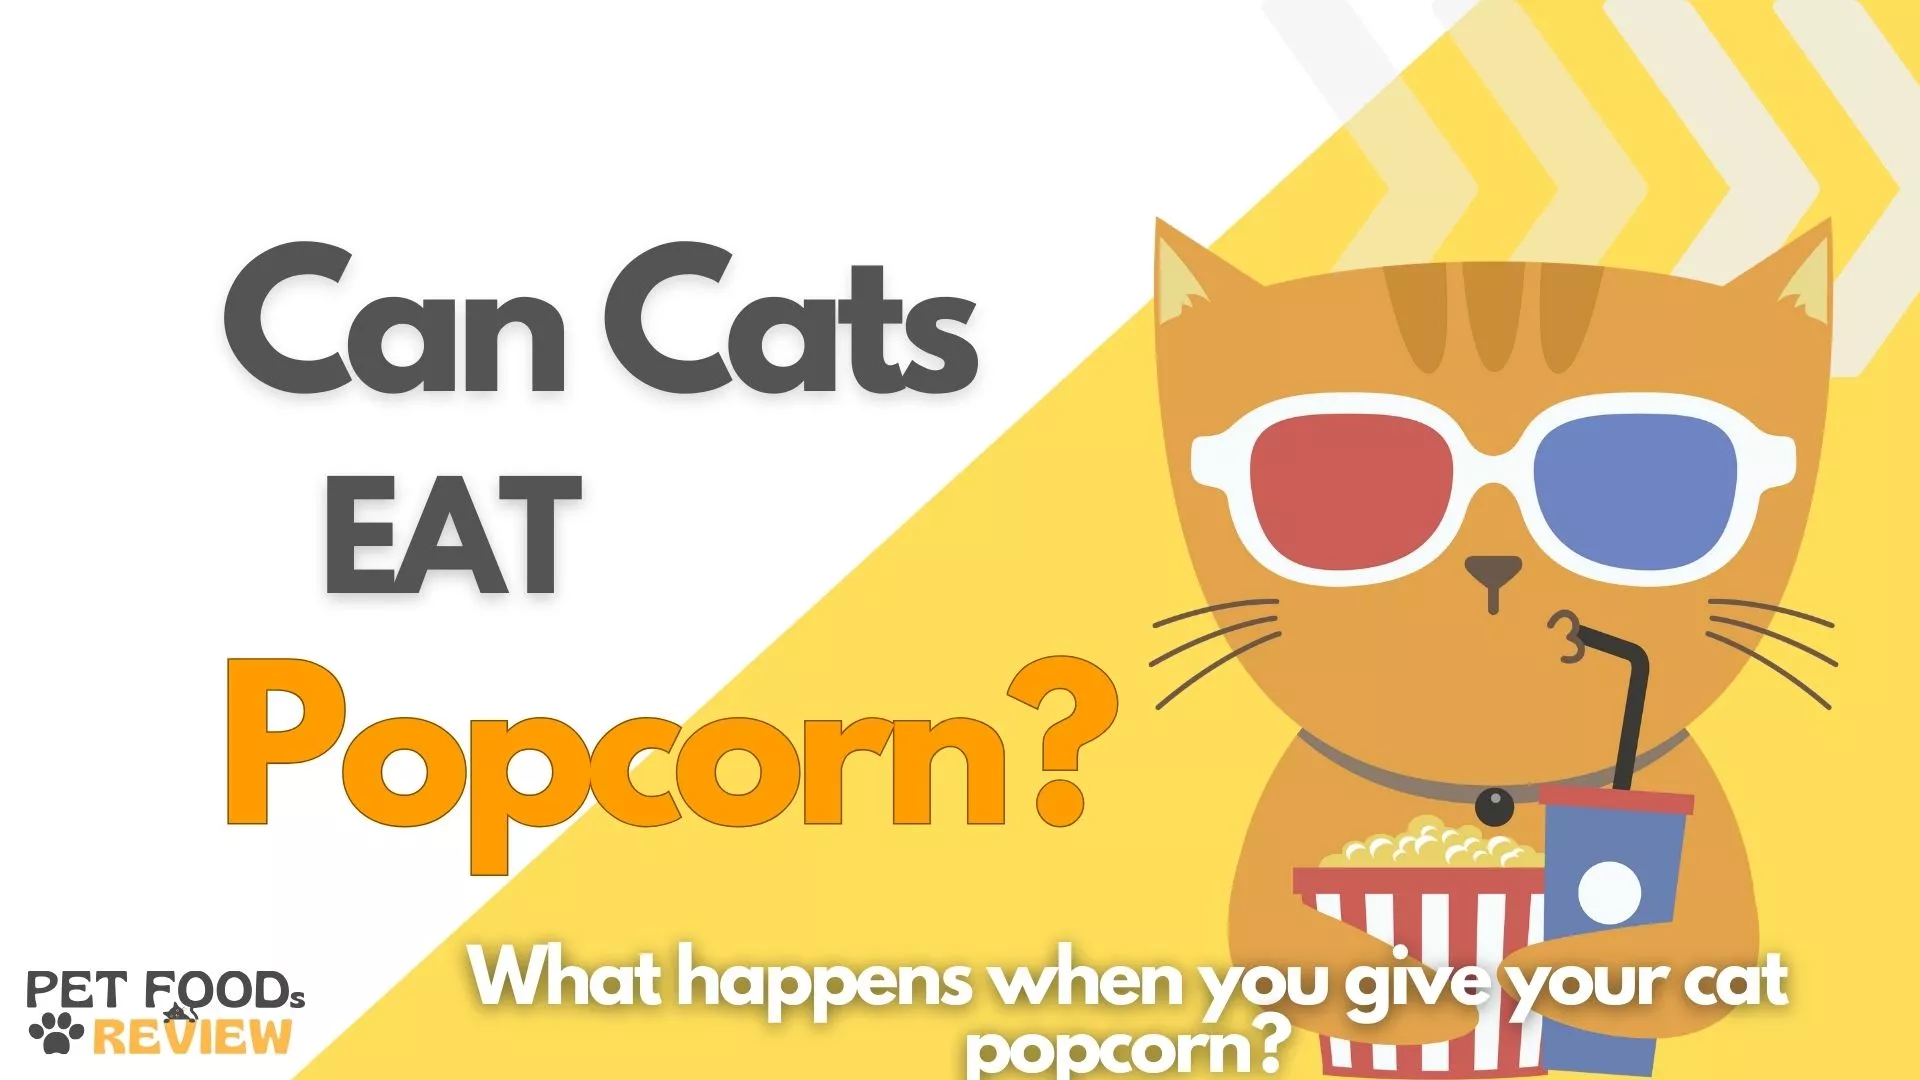 Can Cats eat Popcorn?